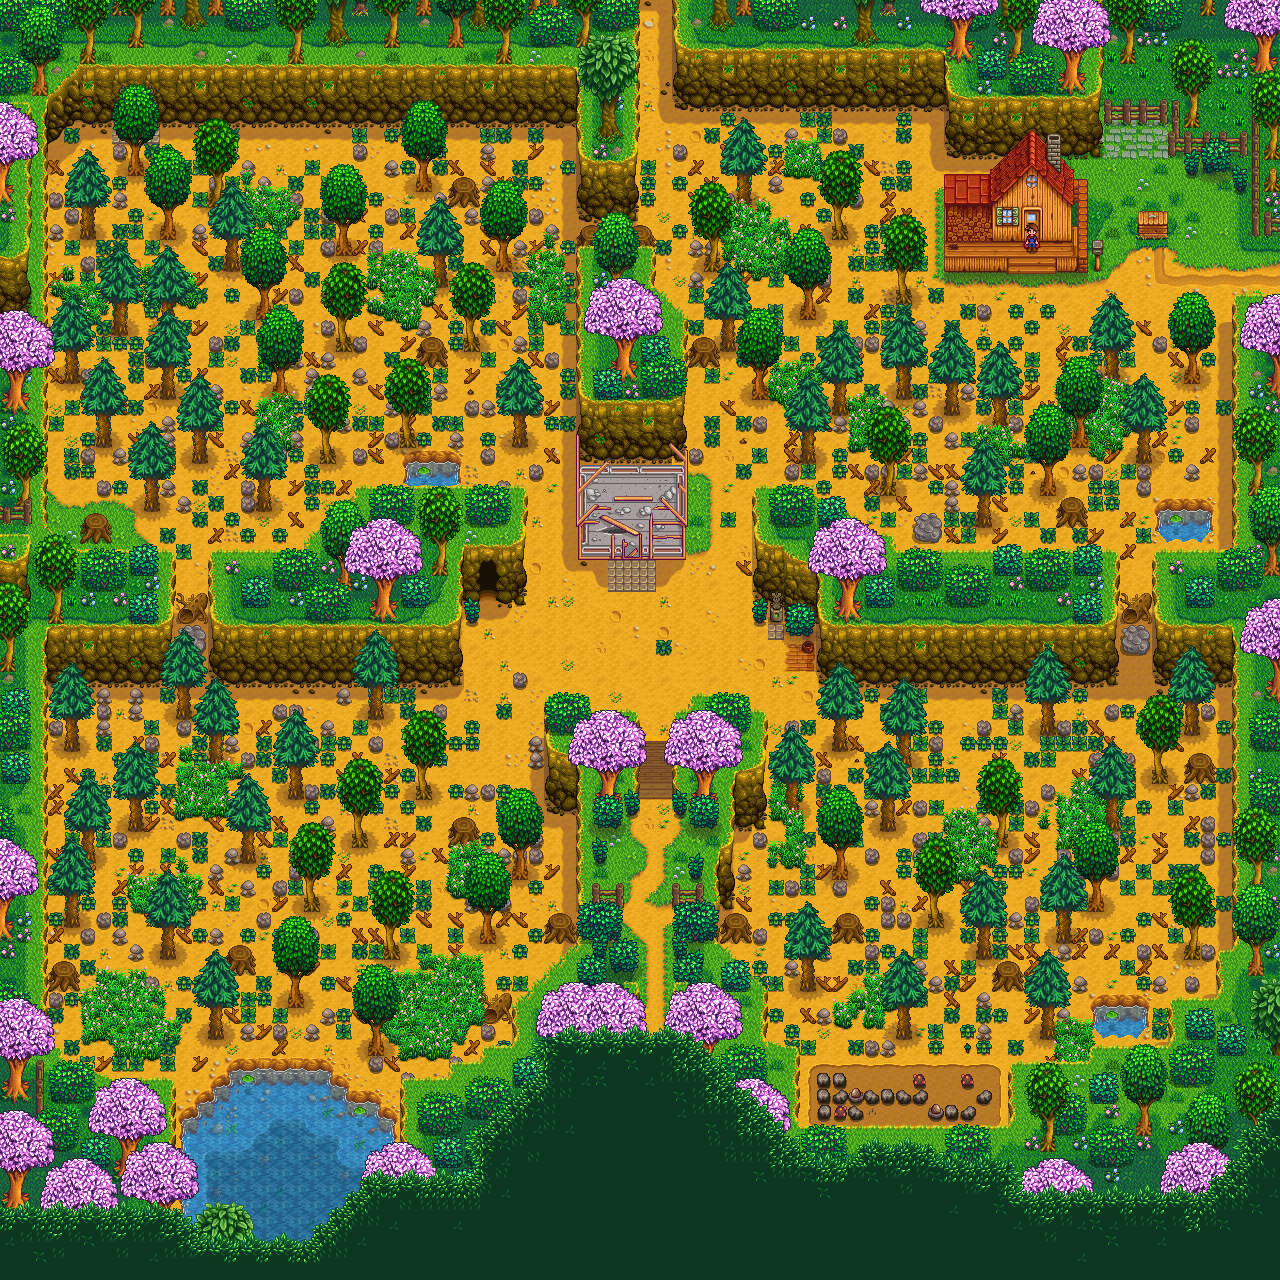 Why The Four Corners Farm is The Best Overall Farm Type in Stardew Valley